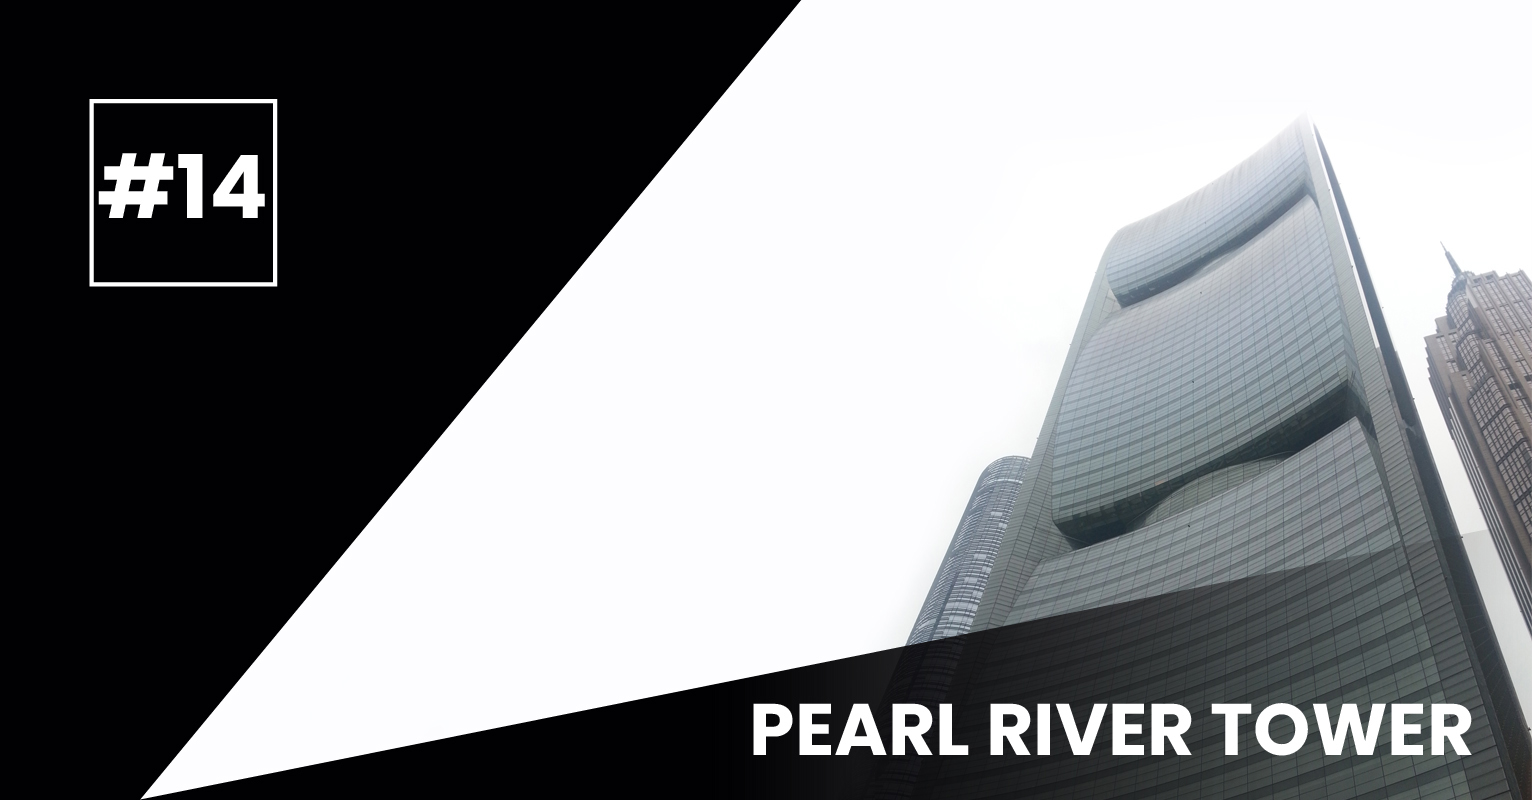 The Pearl Tower, the world’s most energy efficient building » Arce Clima Soluciones integrales